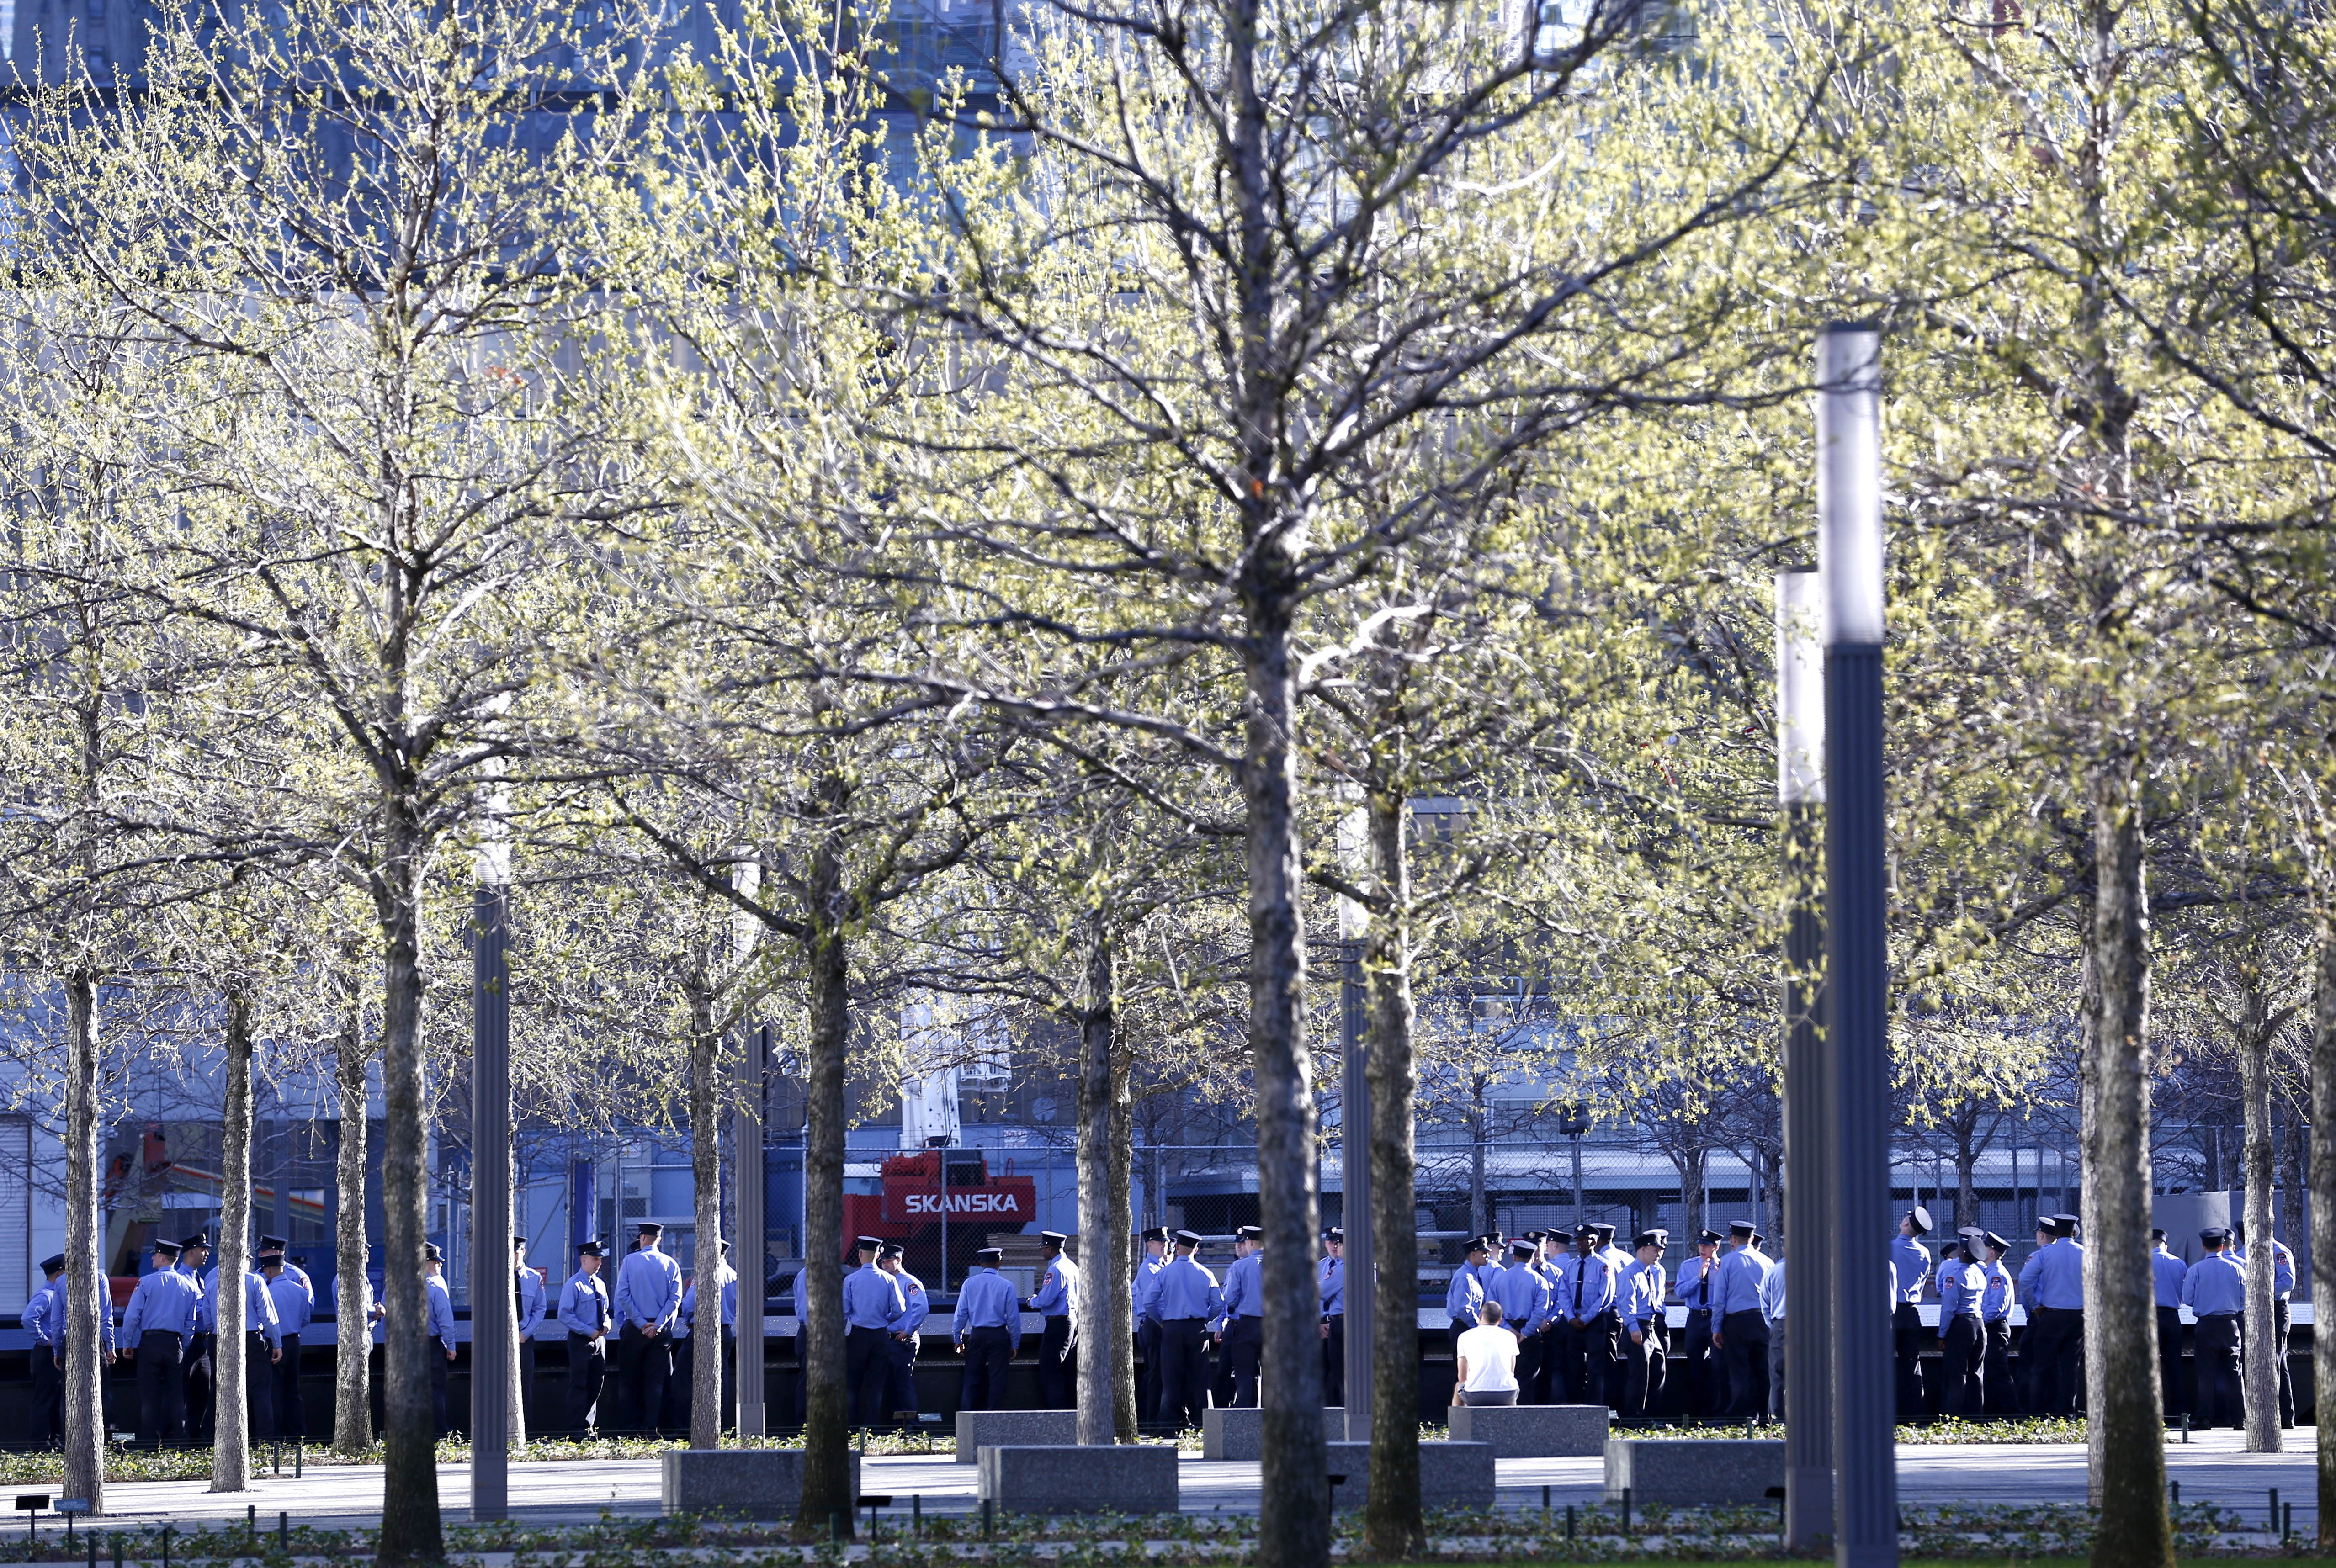 More than 200 probationary FDNY firefighters visit 9/11 Memorial plaza. They are seen gathered around a reflecting pool underneath the Memorial’s swamp white oaks.